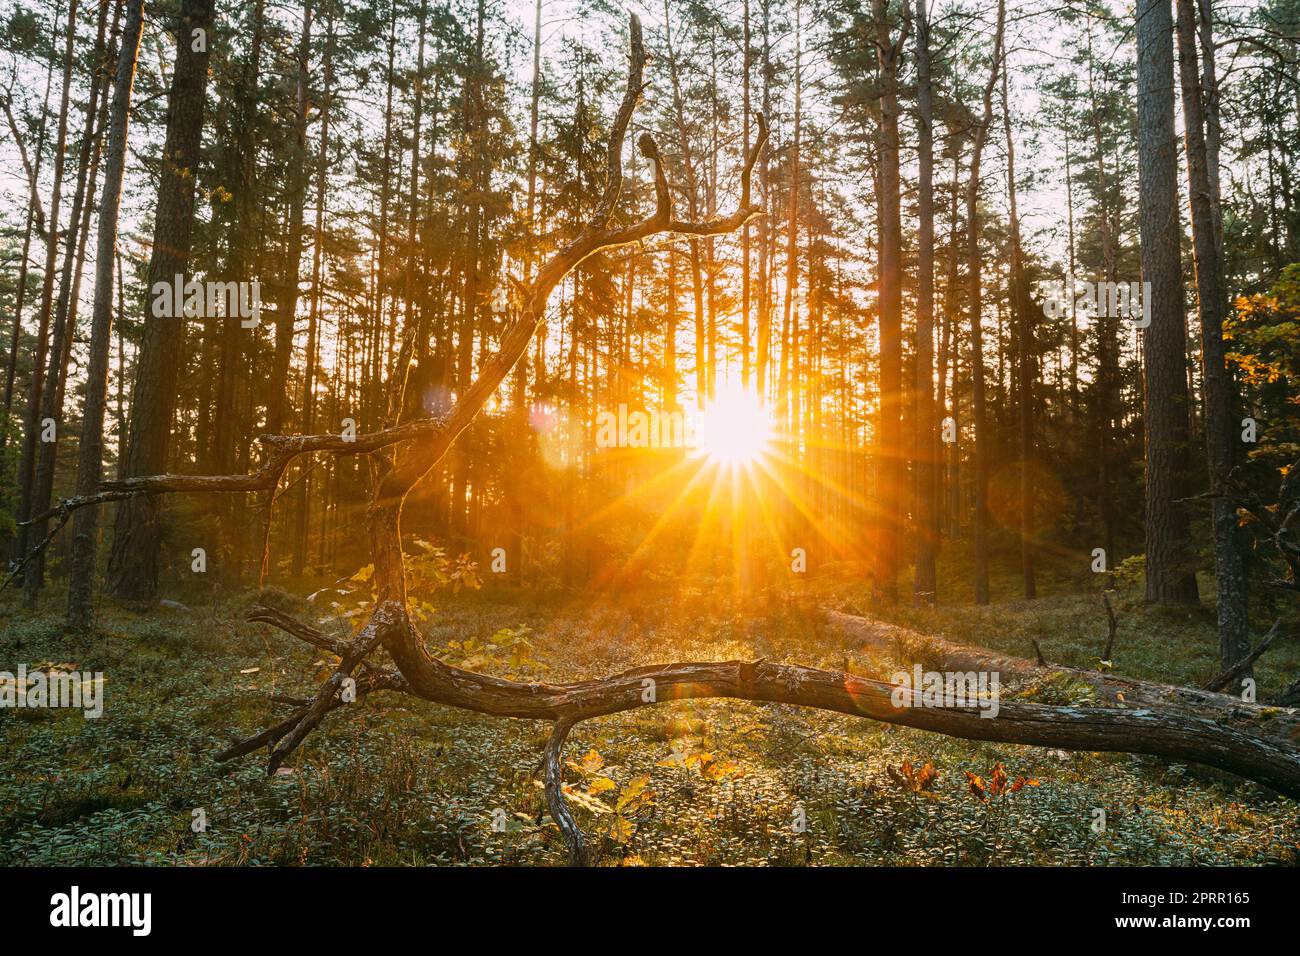 Beautiful Sunset Sunrise In Autumn Coniferous Forest. Sunlight Through Woods In Fall Forest Landscape. Ground Is Strewn With Pine Needles Stock Photo